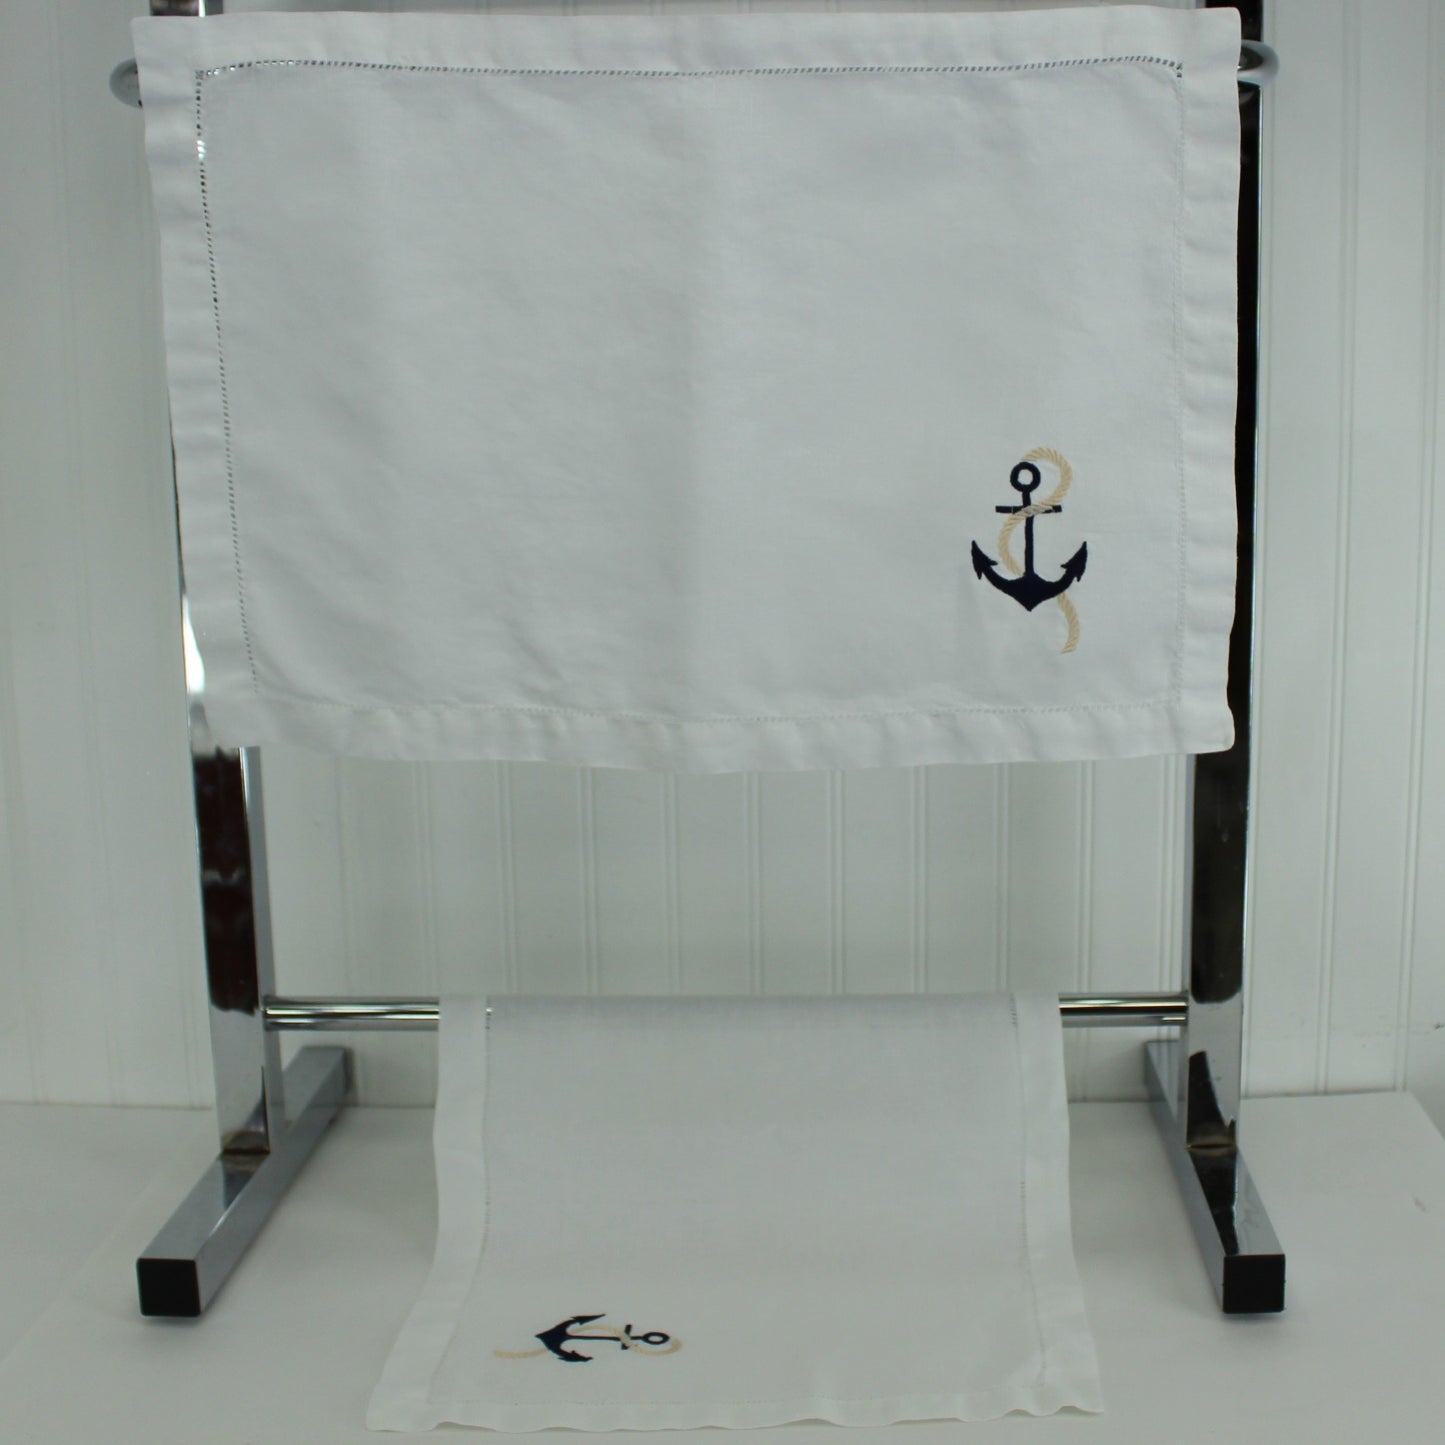 Pair Place Mats Nautical Embroidered Anchor and Rope large size place mats